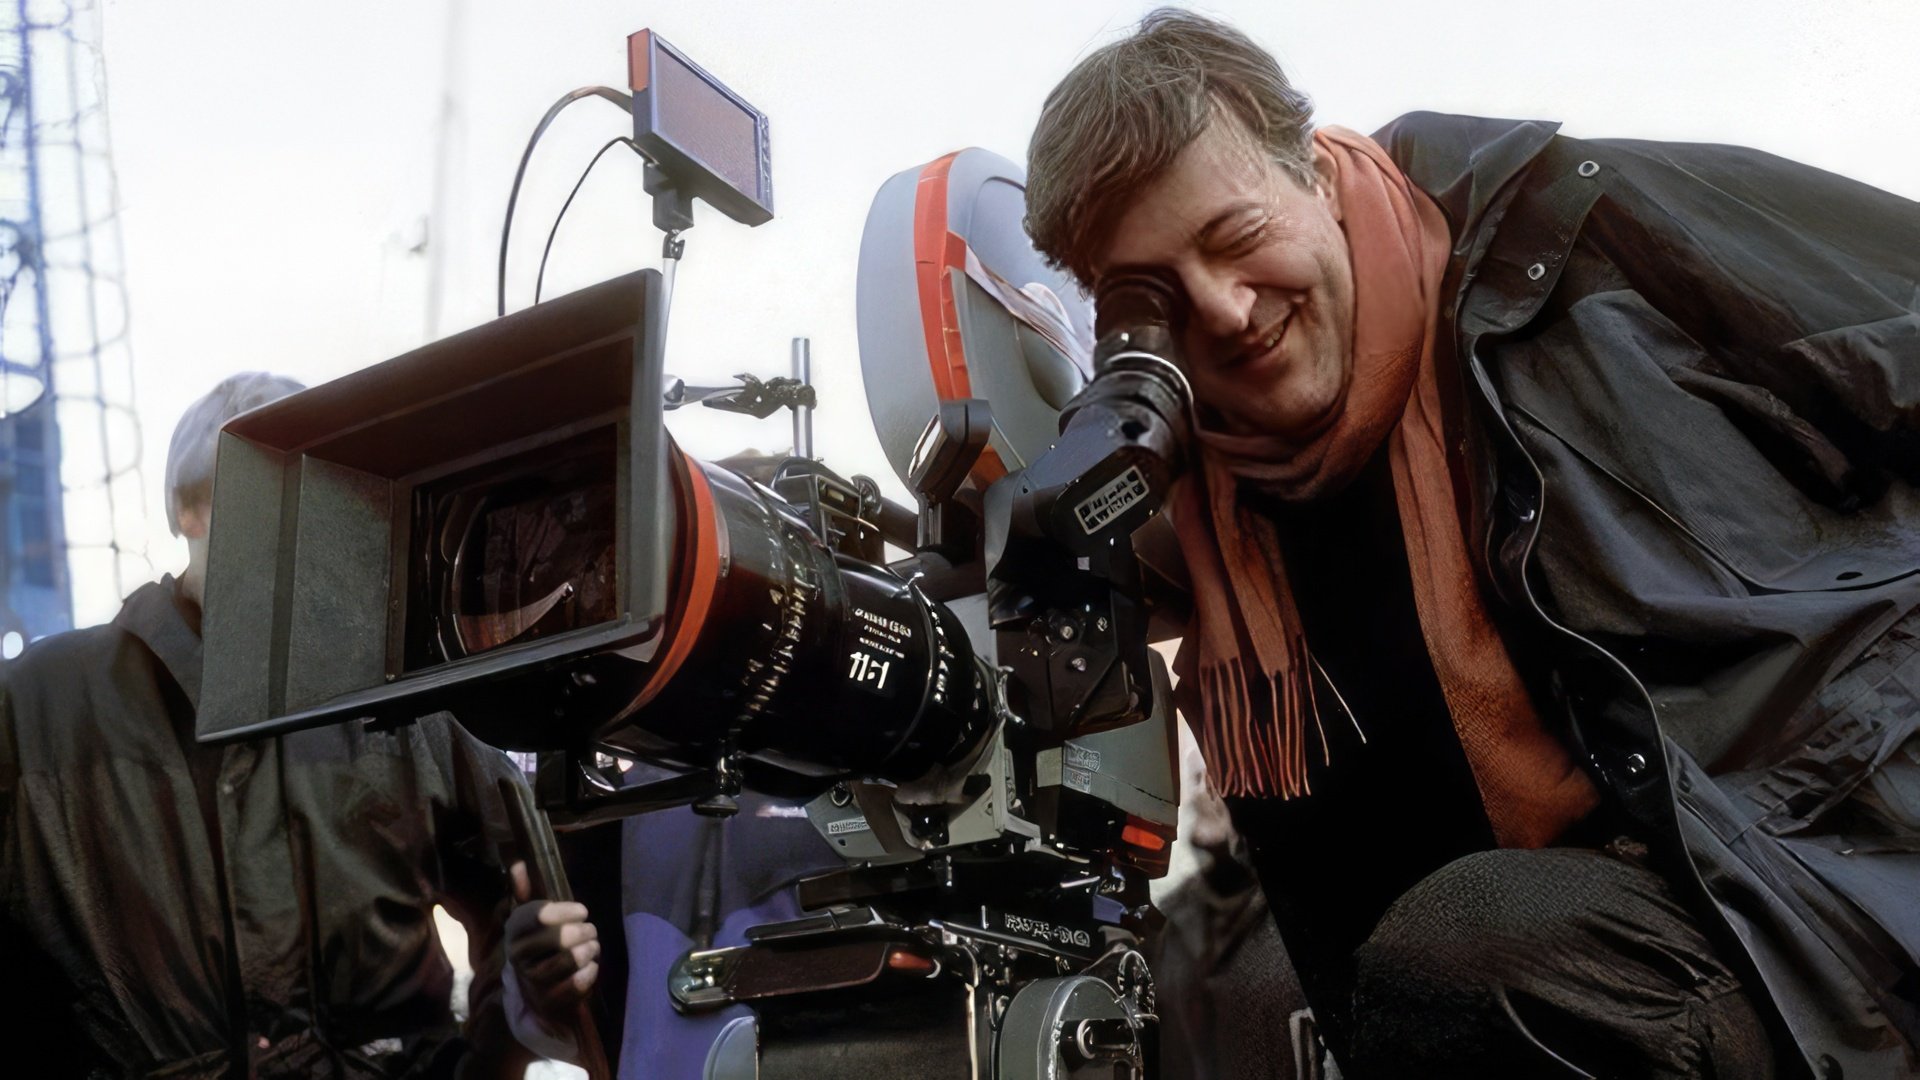 In 2002, Stephen Fry made his debut as a director